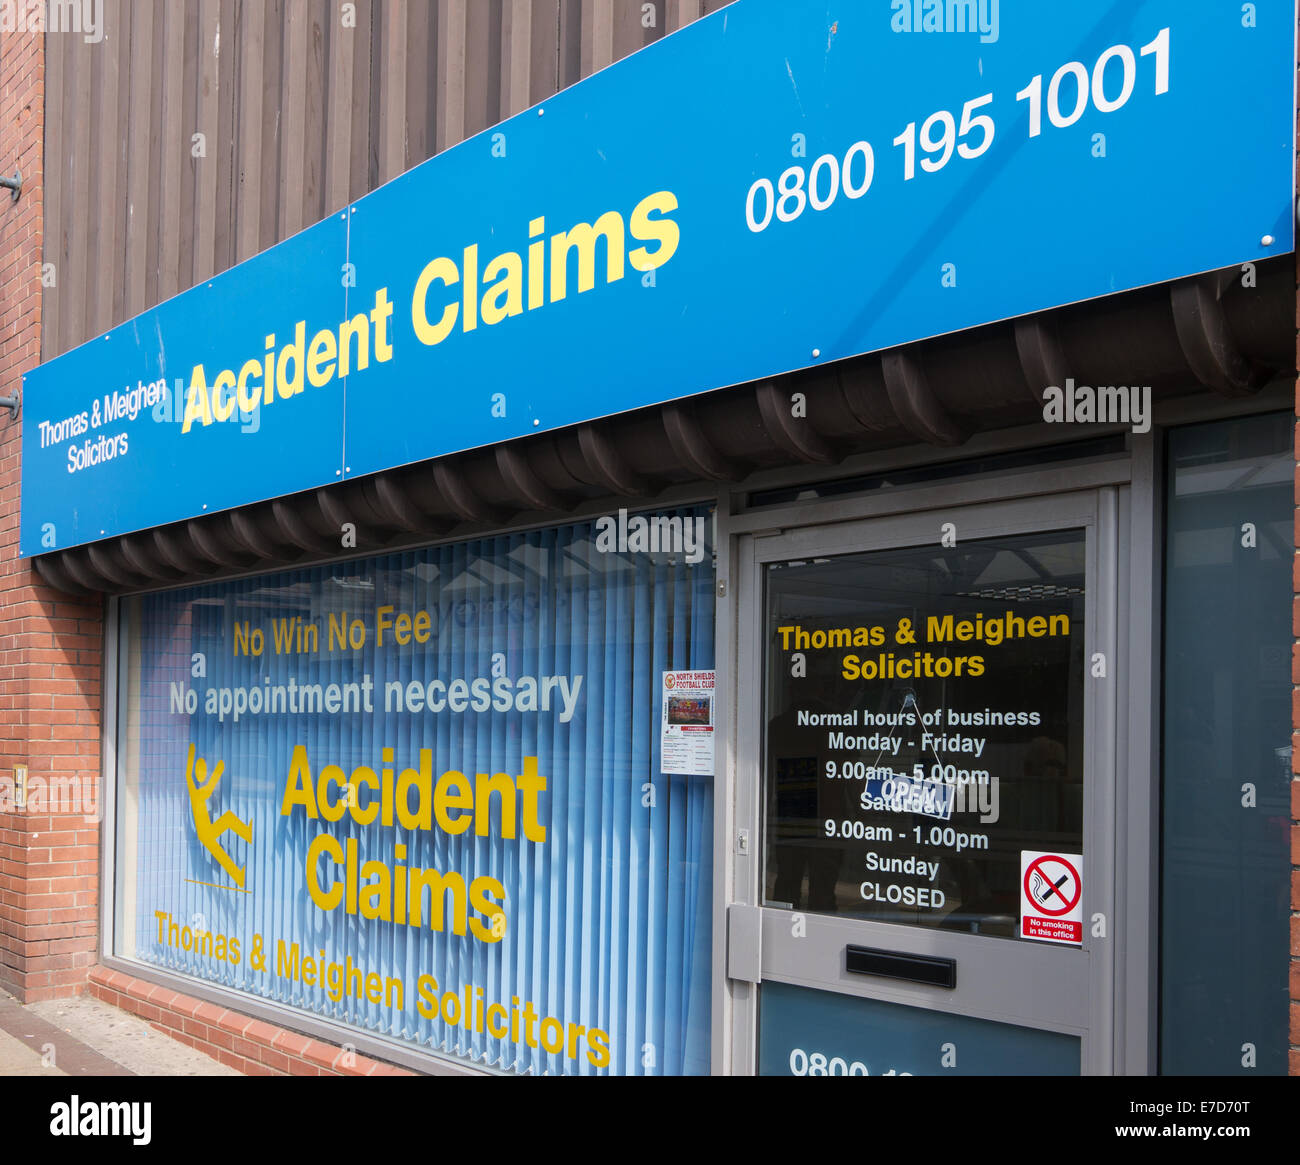 Thomas & Meighen solicitors' office , Accident Claims, North Shields, North East, England, UK Stock Photo